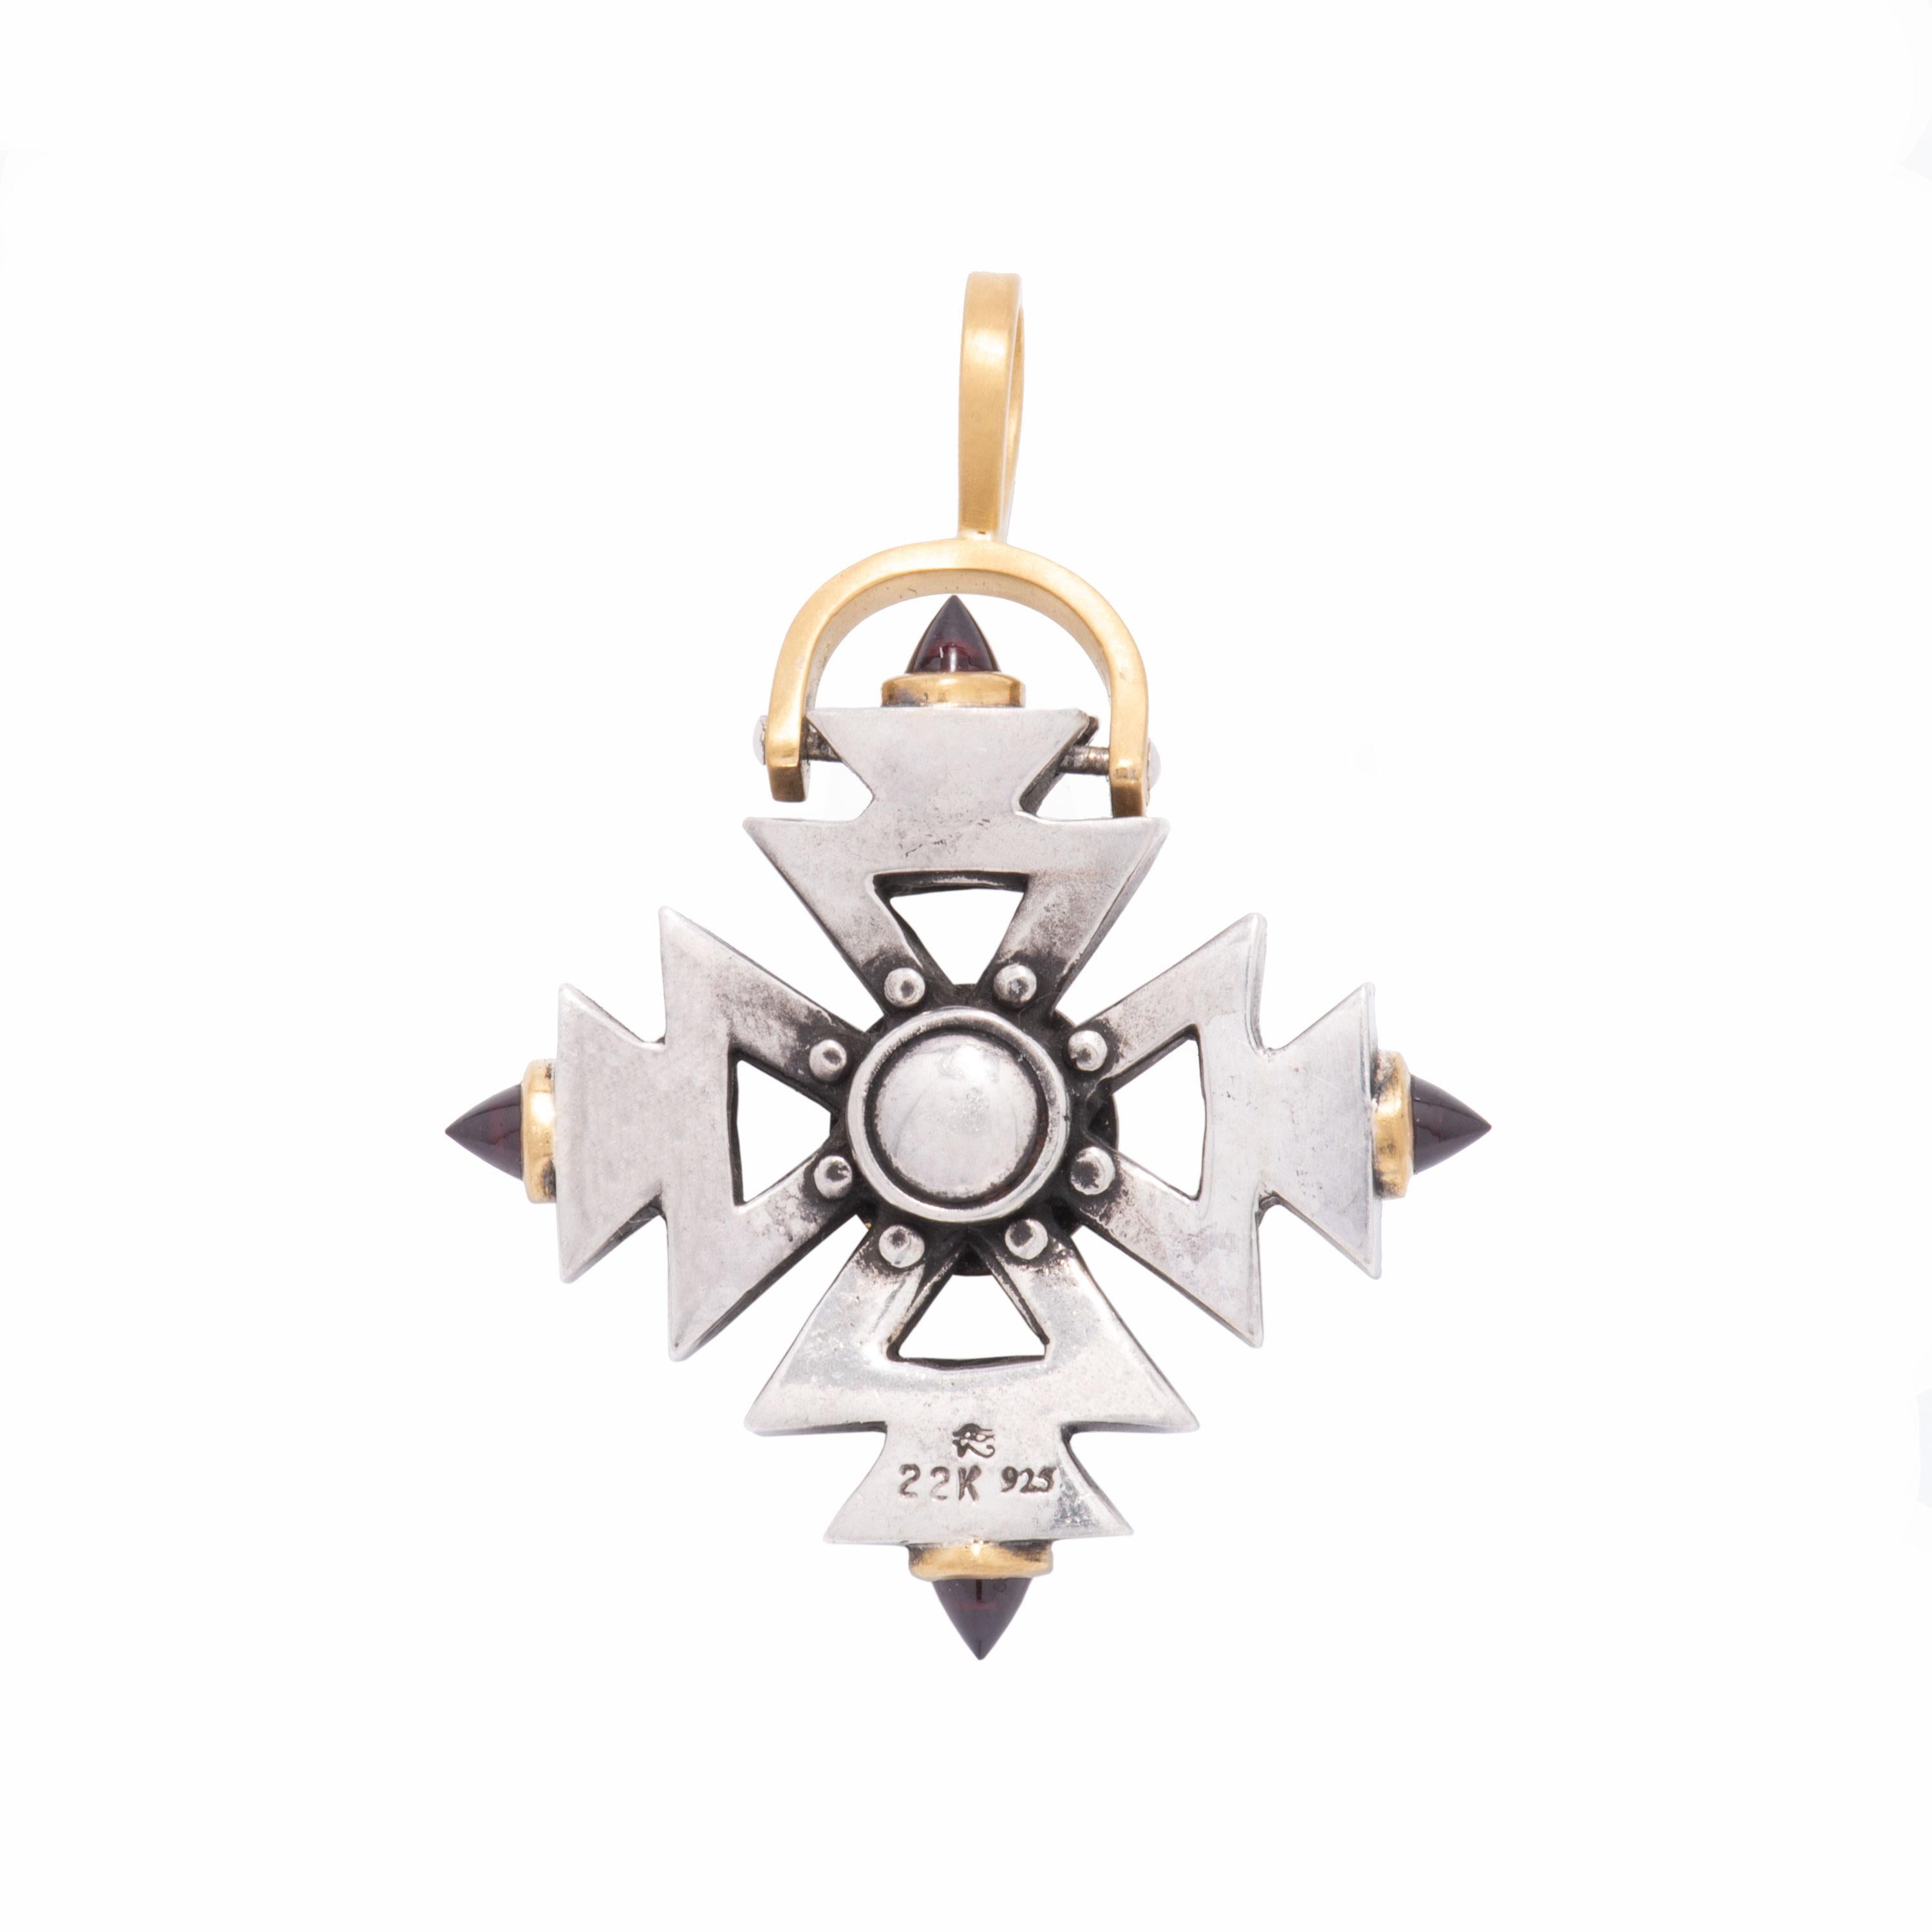 Women's or Men's Aztec Cross Pendant with Garnet Points in Sterling Silver and 22 Karat Gold